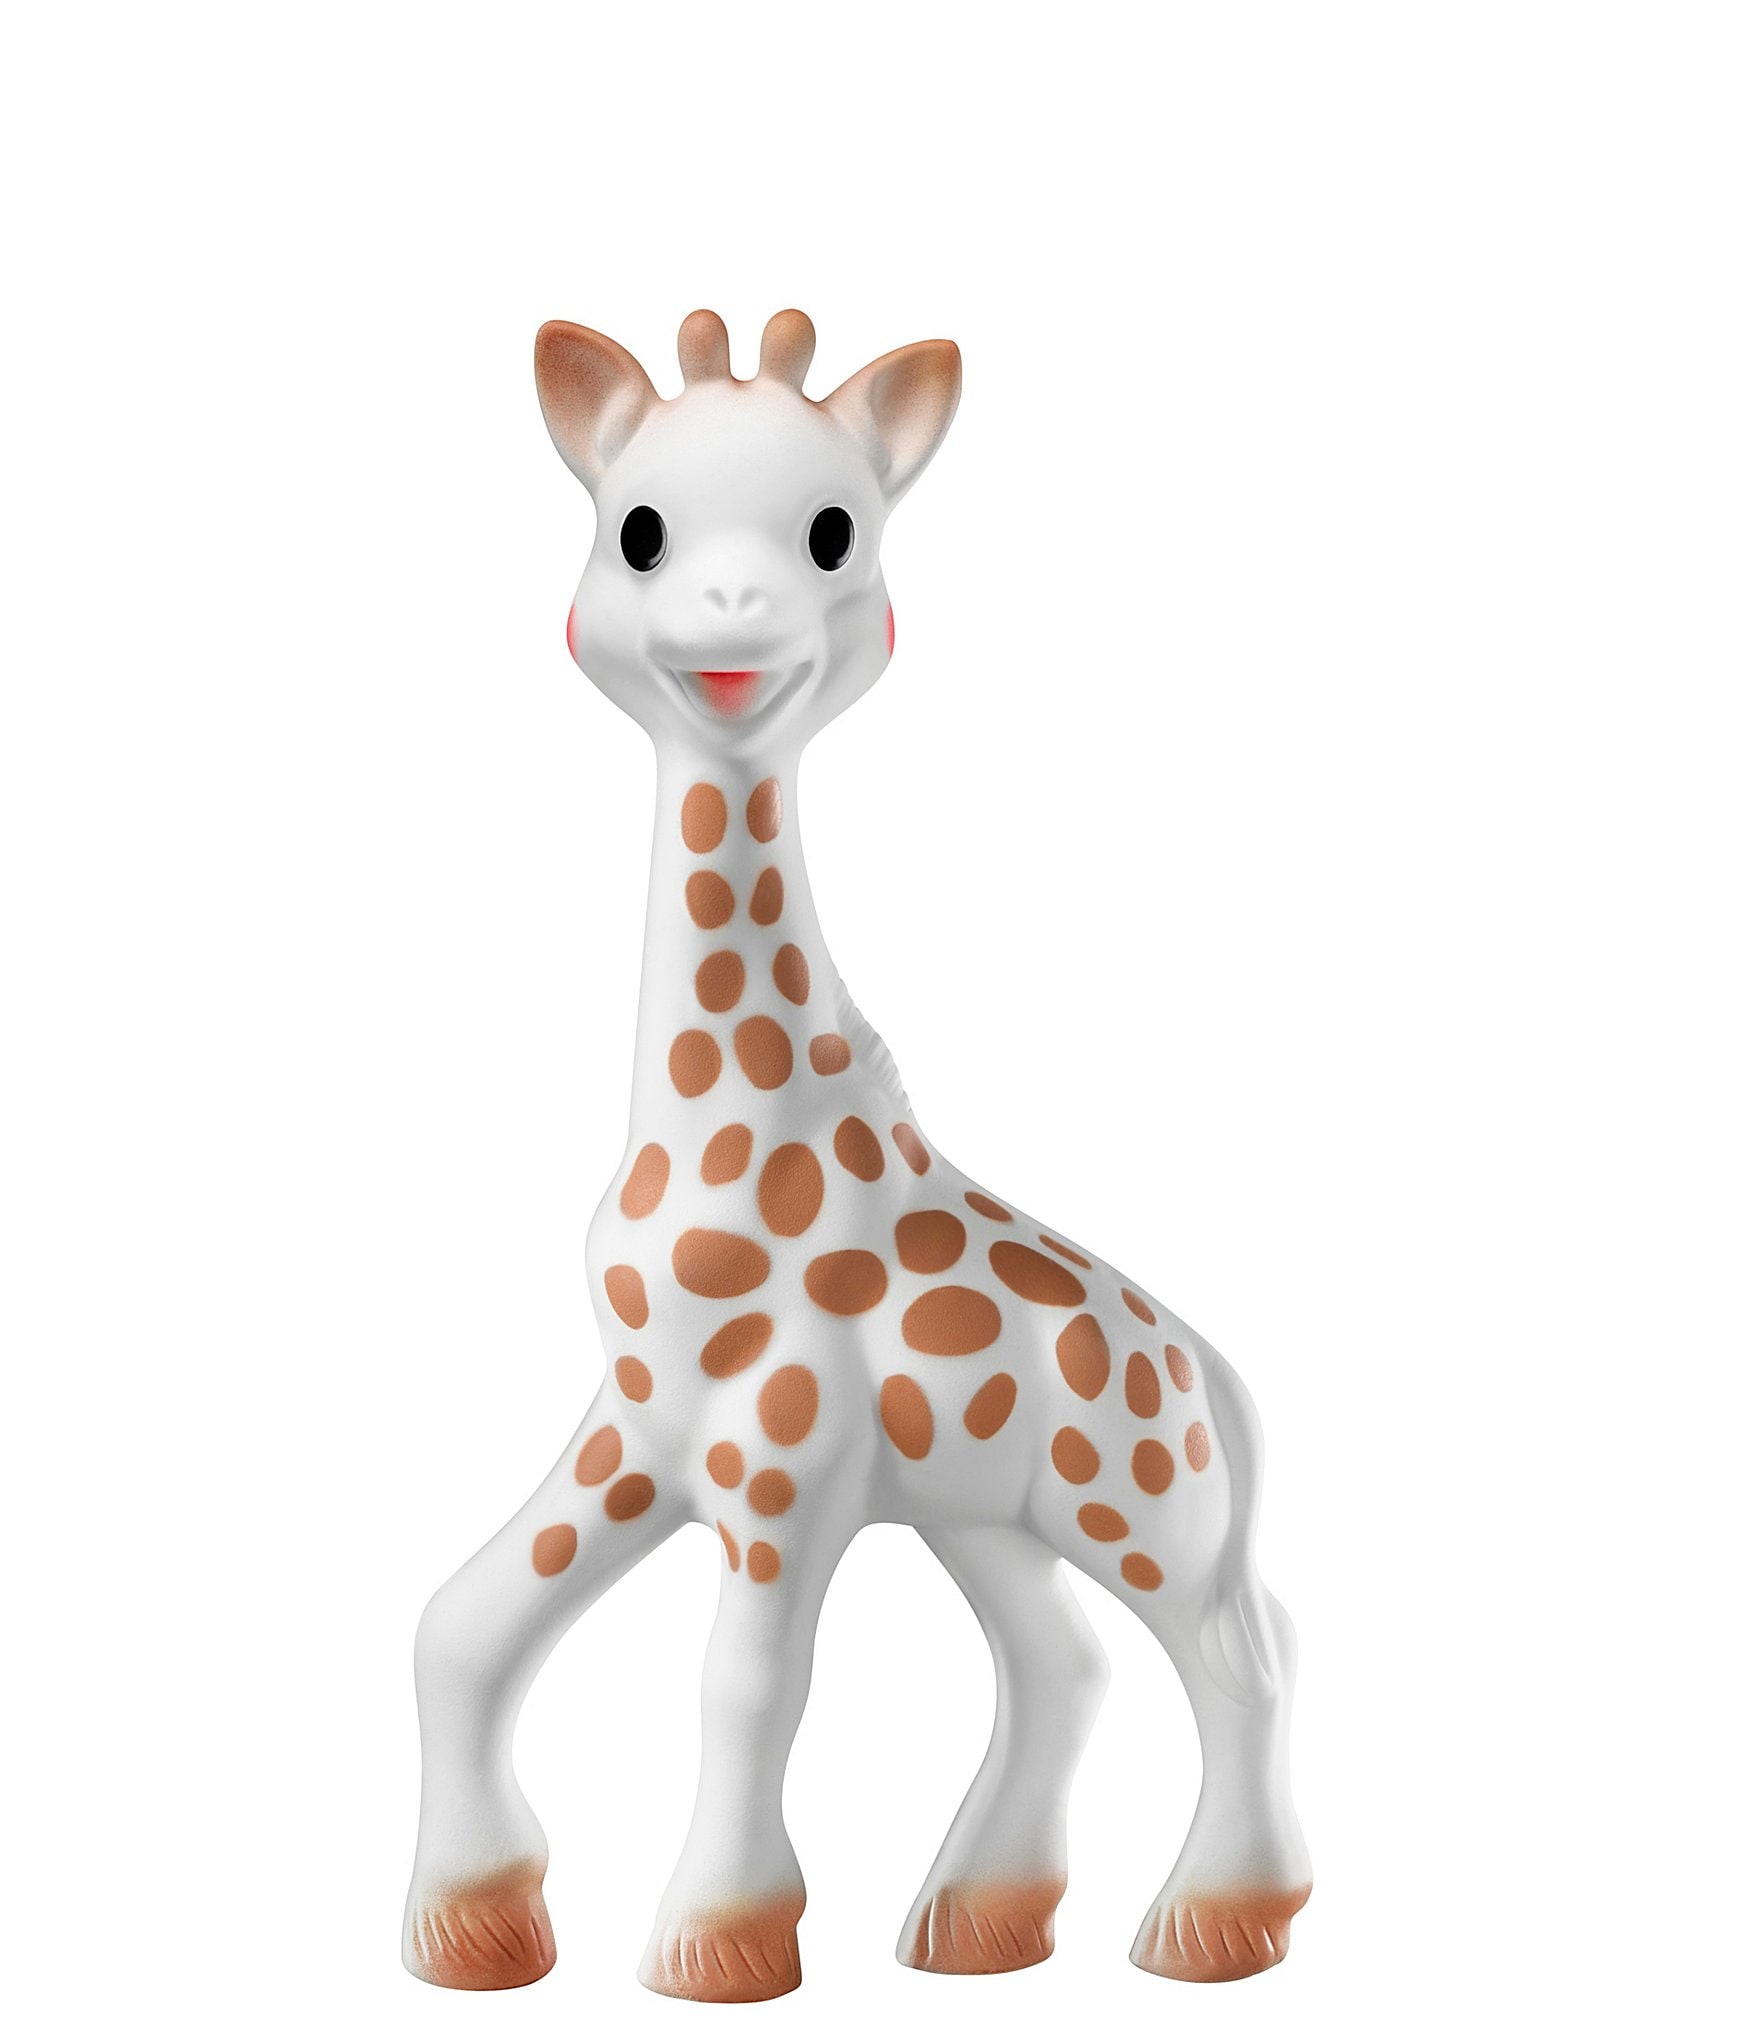 Giraffe Limited Edition Set Natural Rubber Teething Toy Children Toddler Gift ! 